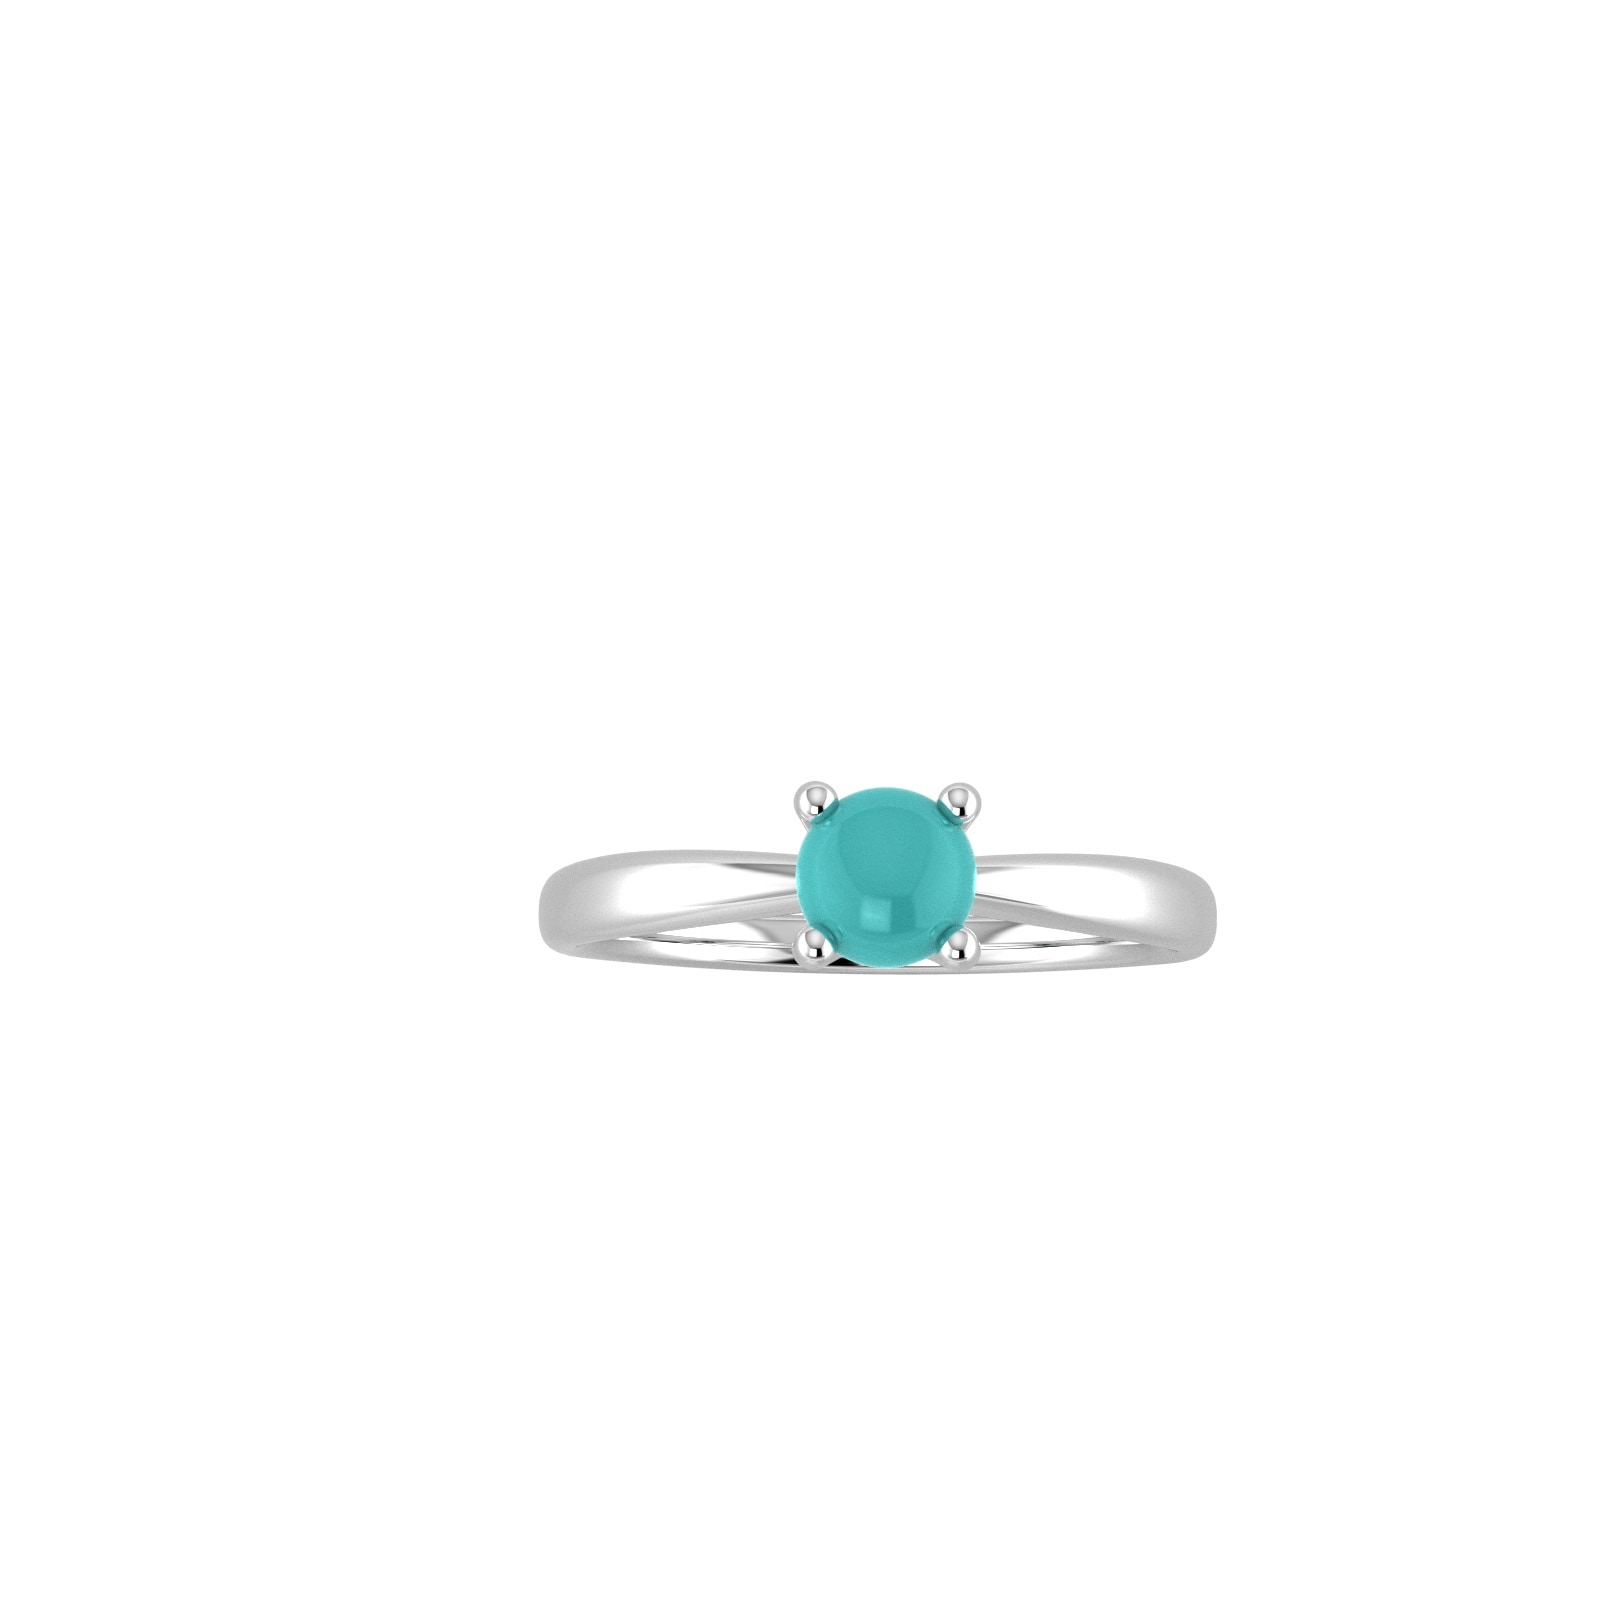 9ct White Gold 4 Claw Turquoise Ring